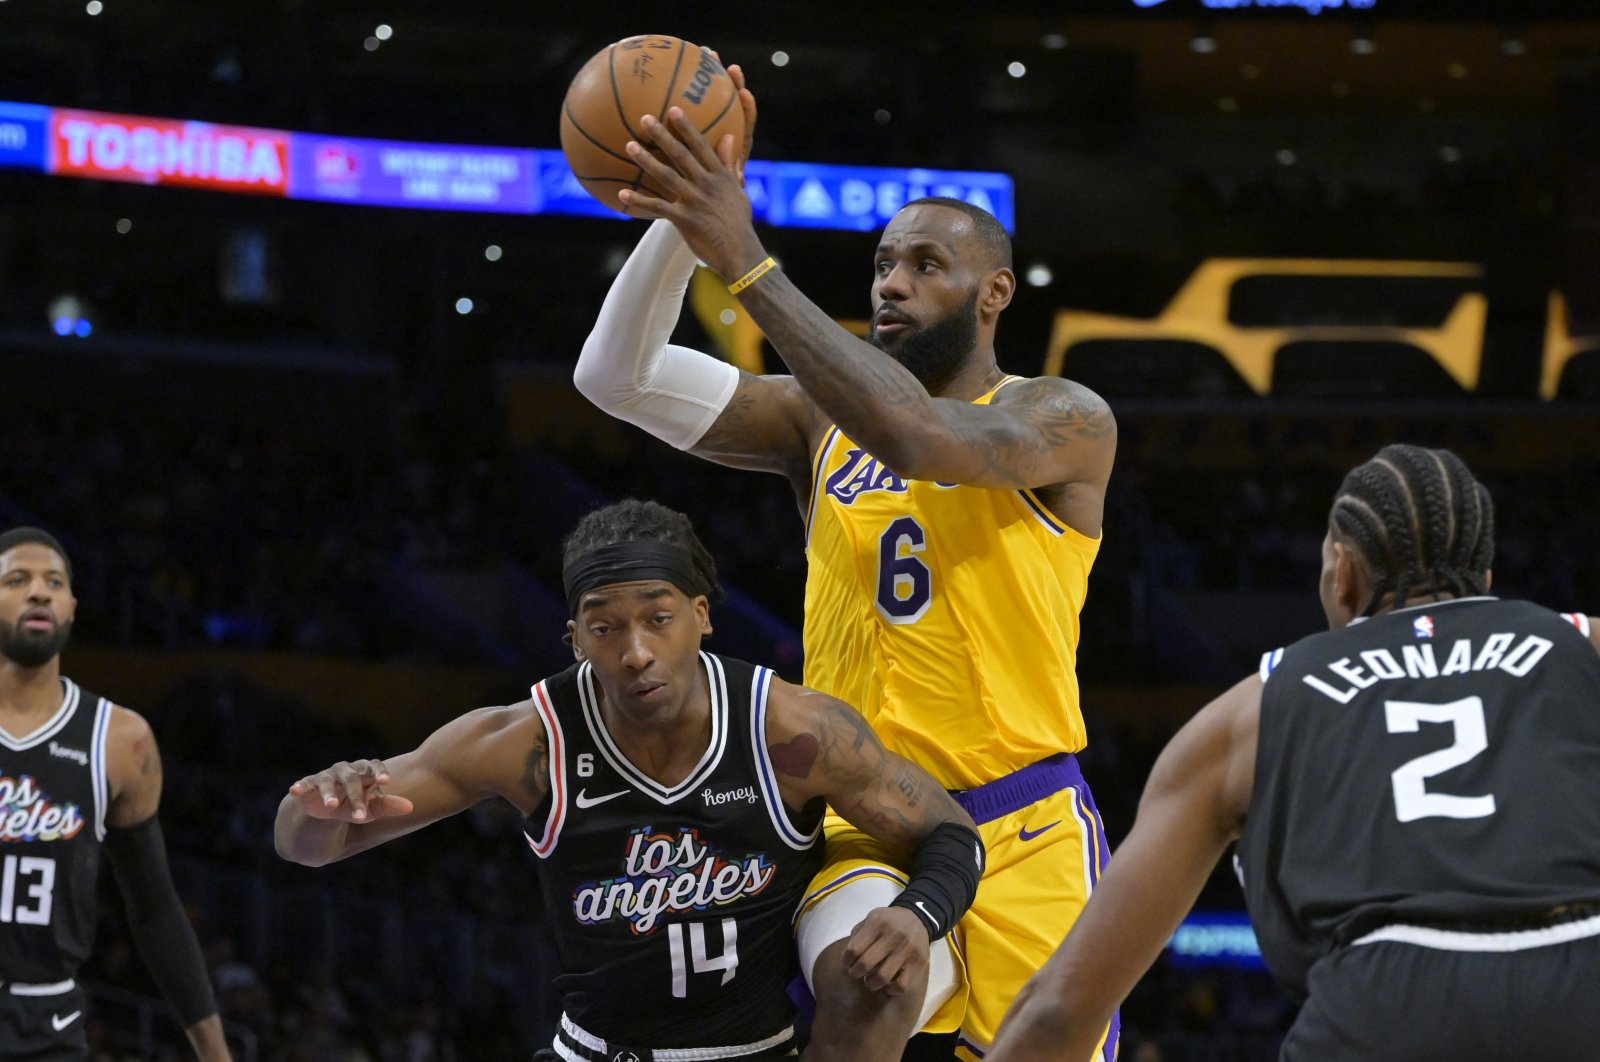 Los Angeles Lakers forward LeBron James (R2) passes the ball over Los Angeles Clippers guard Terance Mann (L2) as guard Paul George (L) and forward Kawhi Leonard (R) look on in the first quarter at Crypto.com Arena, Los Angeles, California, USA, Jan 24, 2023. (Reuters Photo)